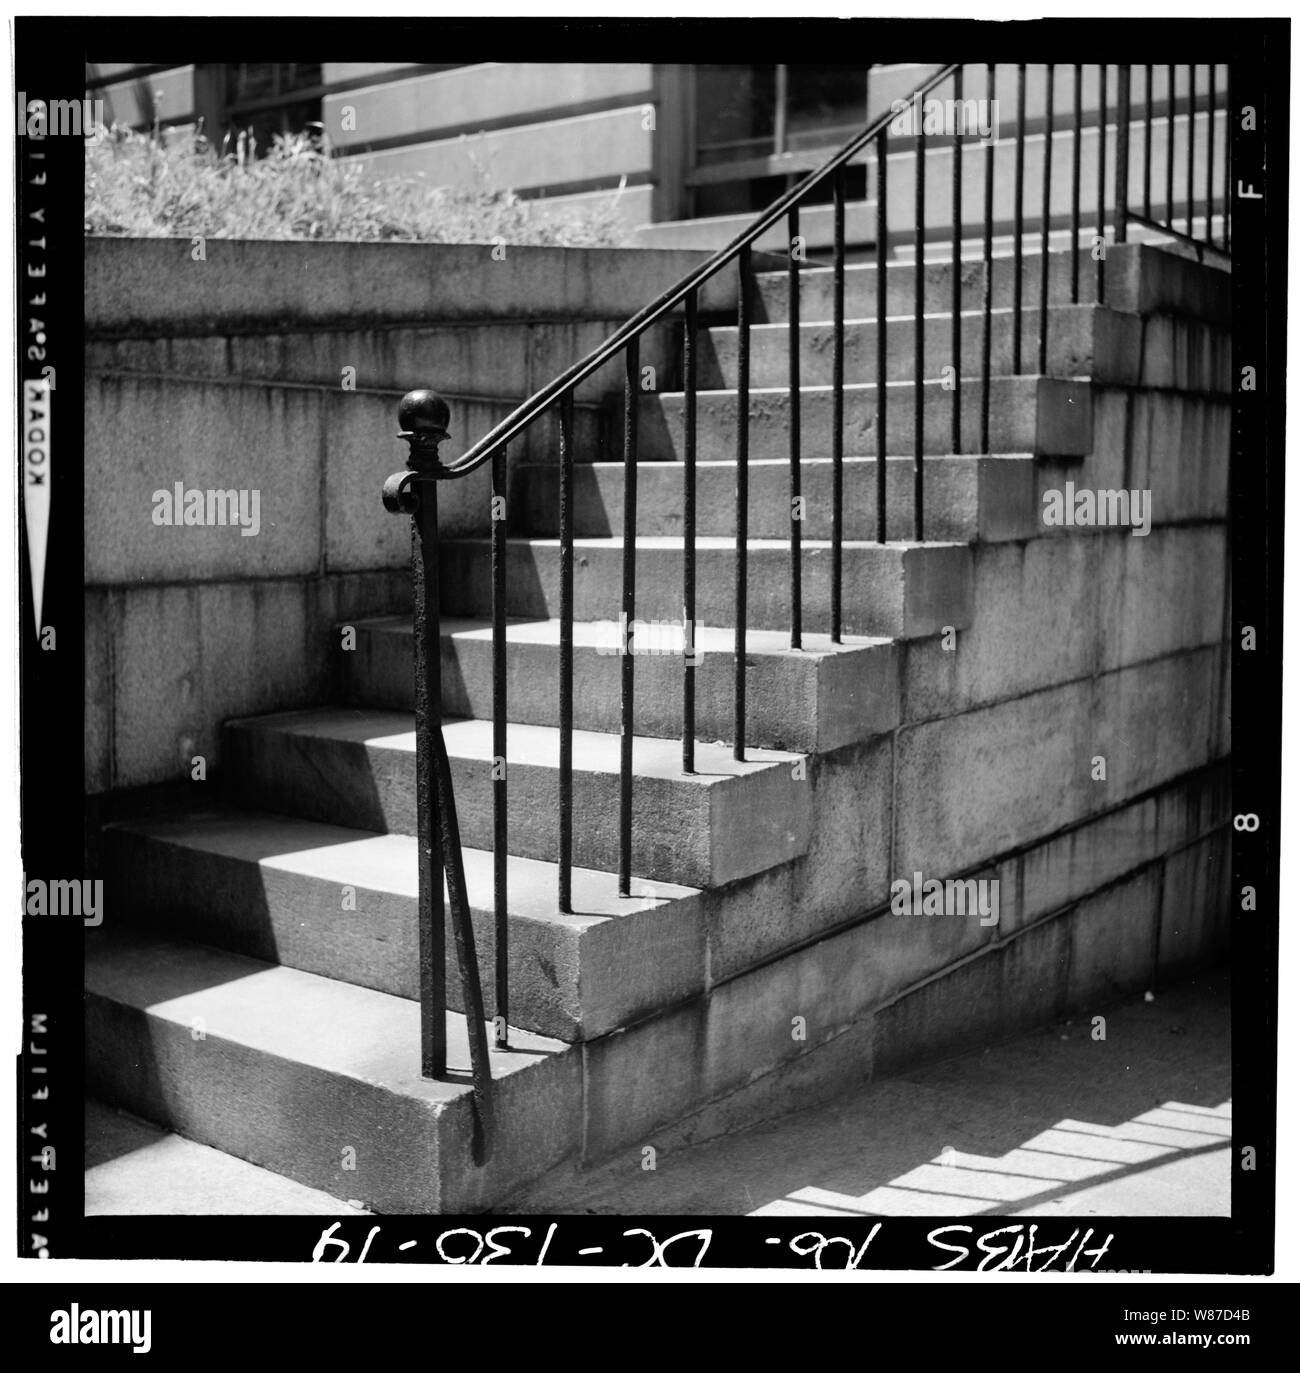 14. DETAIL, IRON STAIR RAILING, STREET LEVEL TO GROUND FLOOR LEVEL, SHOWING NEWEL POST; 14. DETAIL, IRON STAIR RAILING, STREET LEVEL TO GROUND FLOOR LEVEL, SHOWING NEWEL POST (2 x 2 negative; 5 x 7 print) - Patent Office Building, Bounded by Seventh, Ninth, F & G Streets, Northwest, Washington, District of Columbia, DC Stock Photo